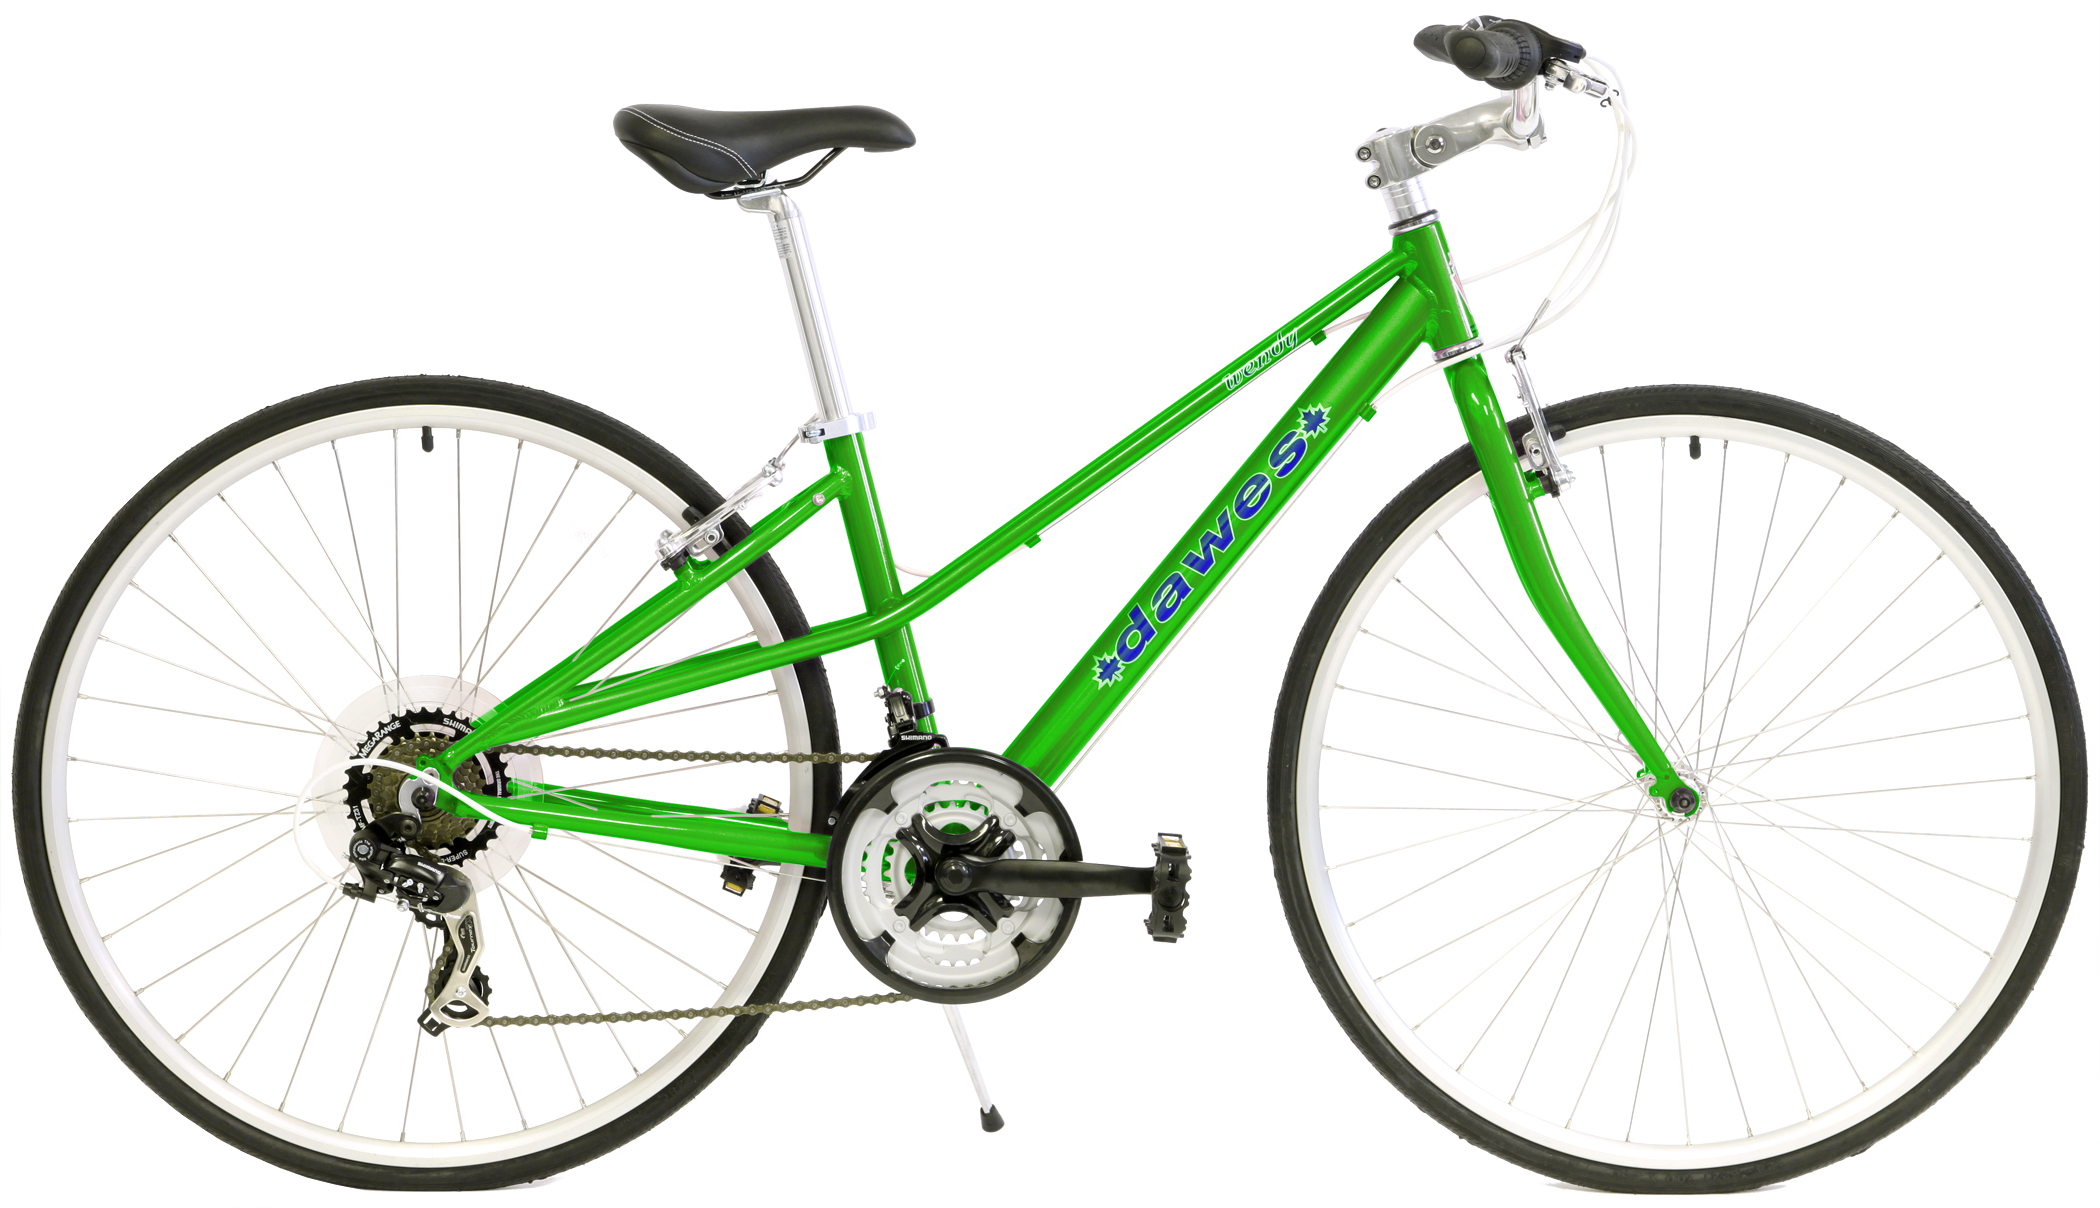 Save Up to 60% Off Womens Hybrid City Bikes - Dawes Wendy Women Specific Flat Bar, Hybrid Road Bikes